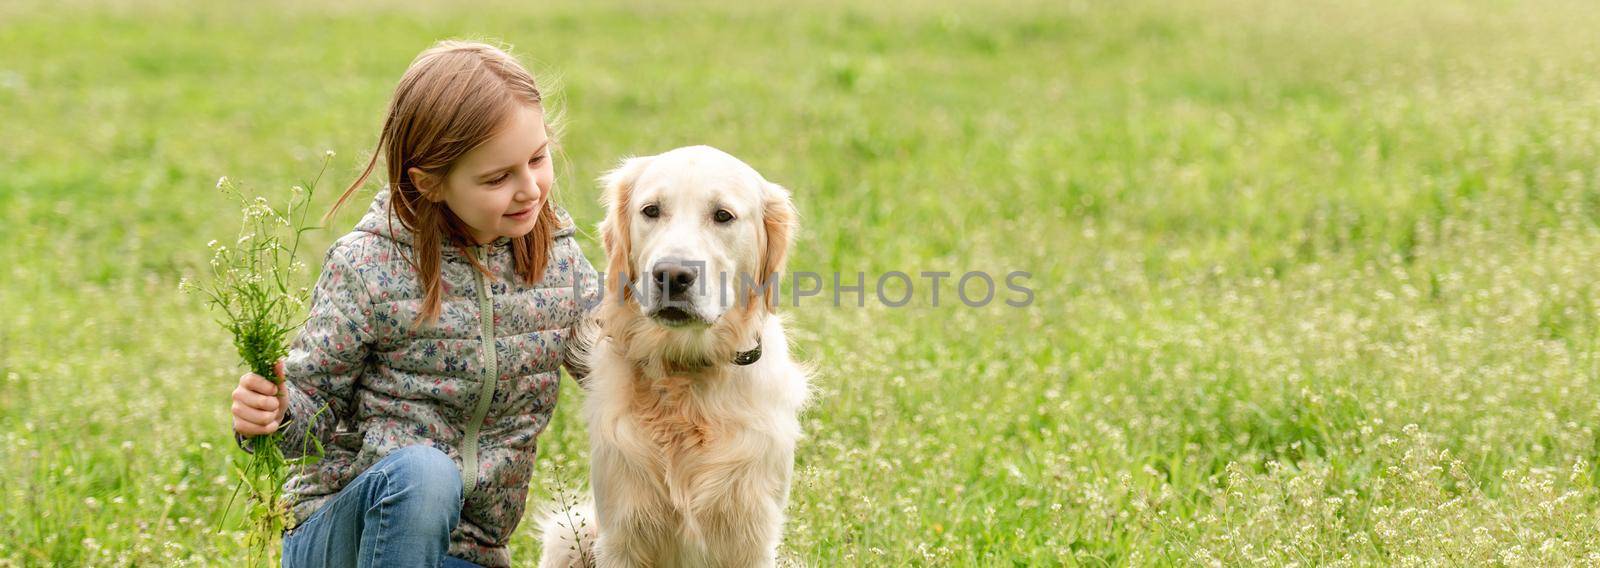 Smiling little girl looking at cute dog sitting in flowers on sunny field